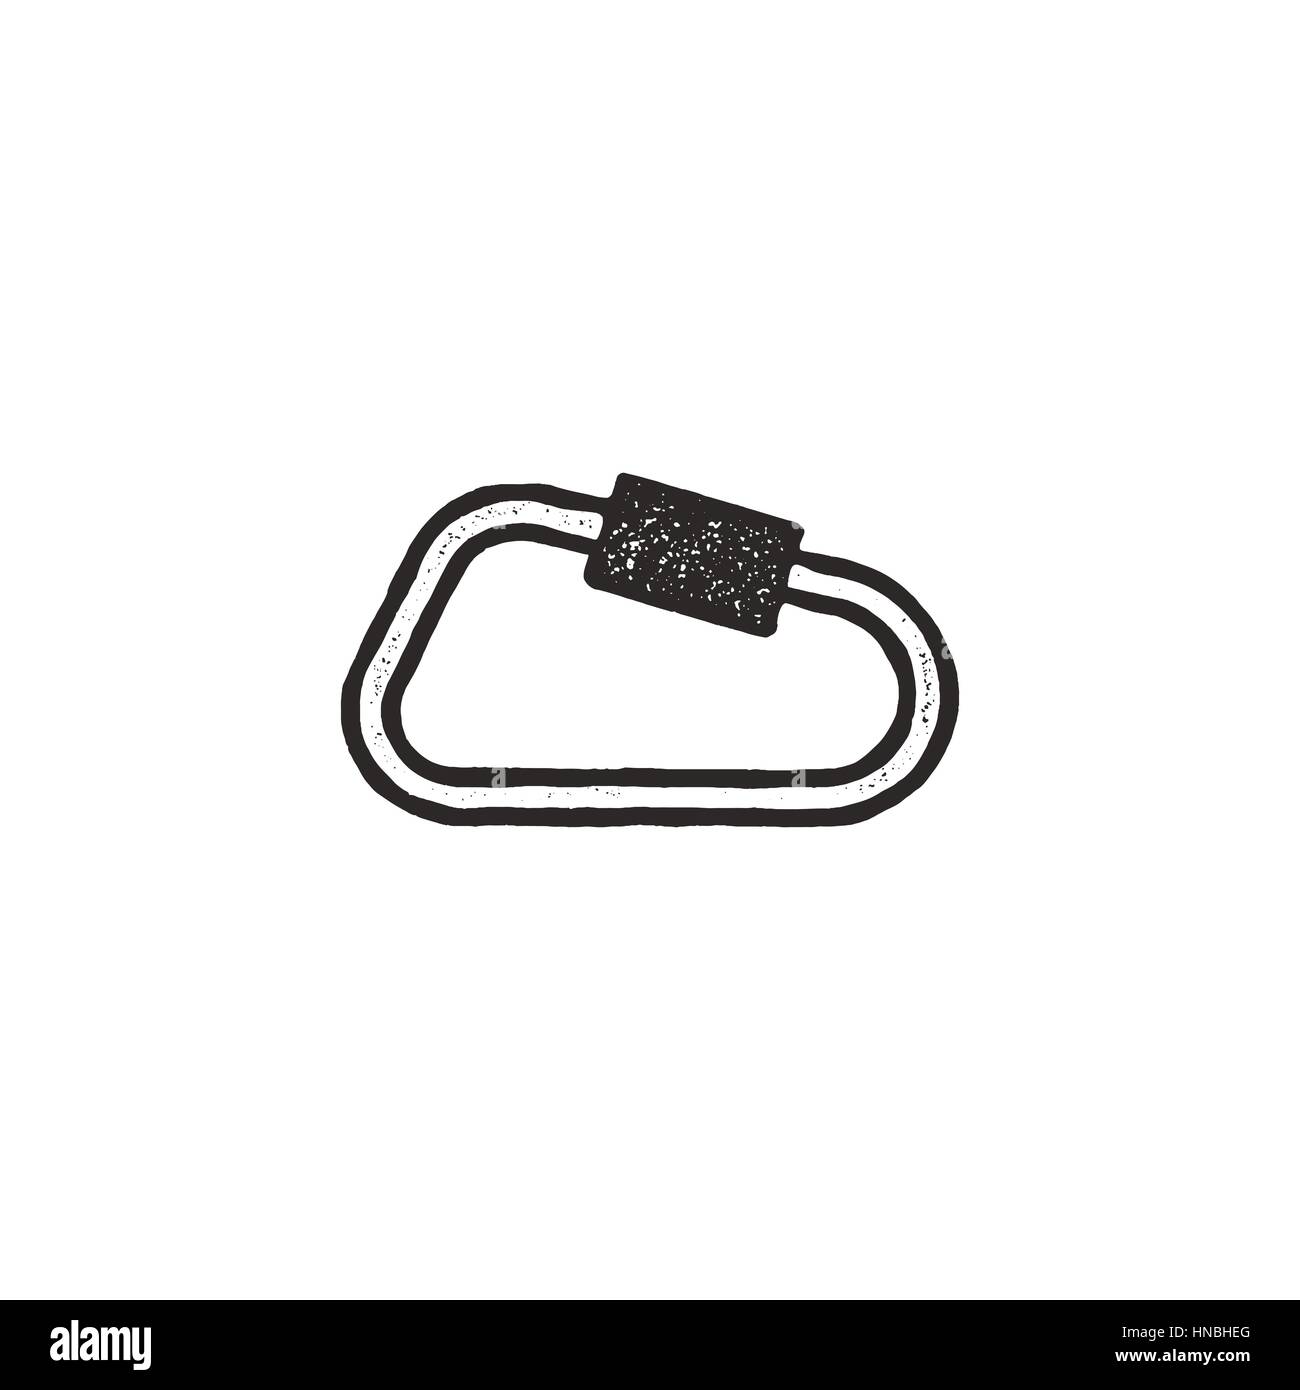 carabiner icon isolated on white background. Letterpress effect. Vector adventure pictogram. Stock Vector